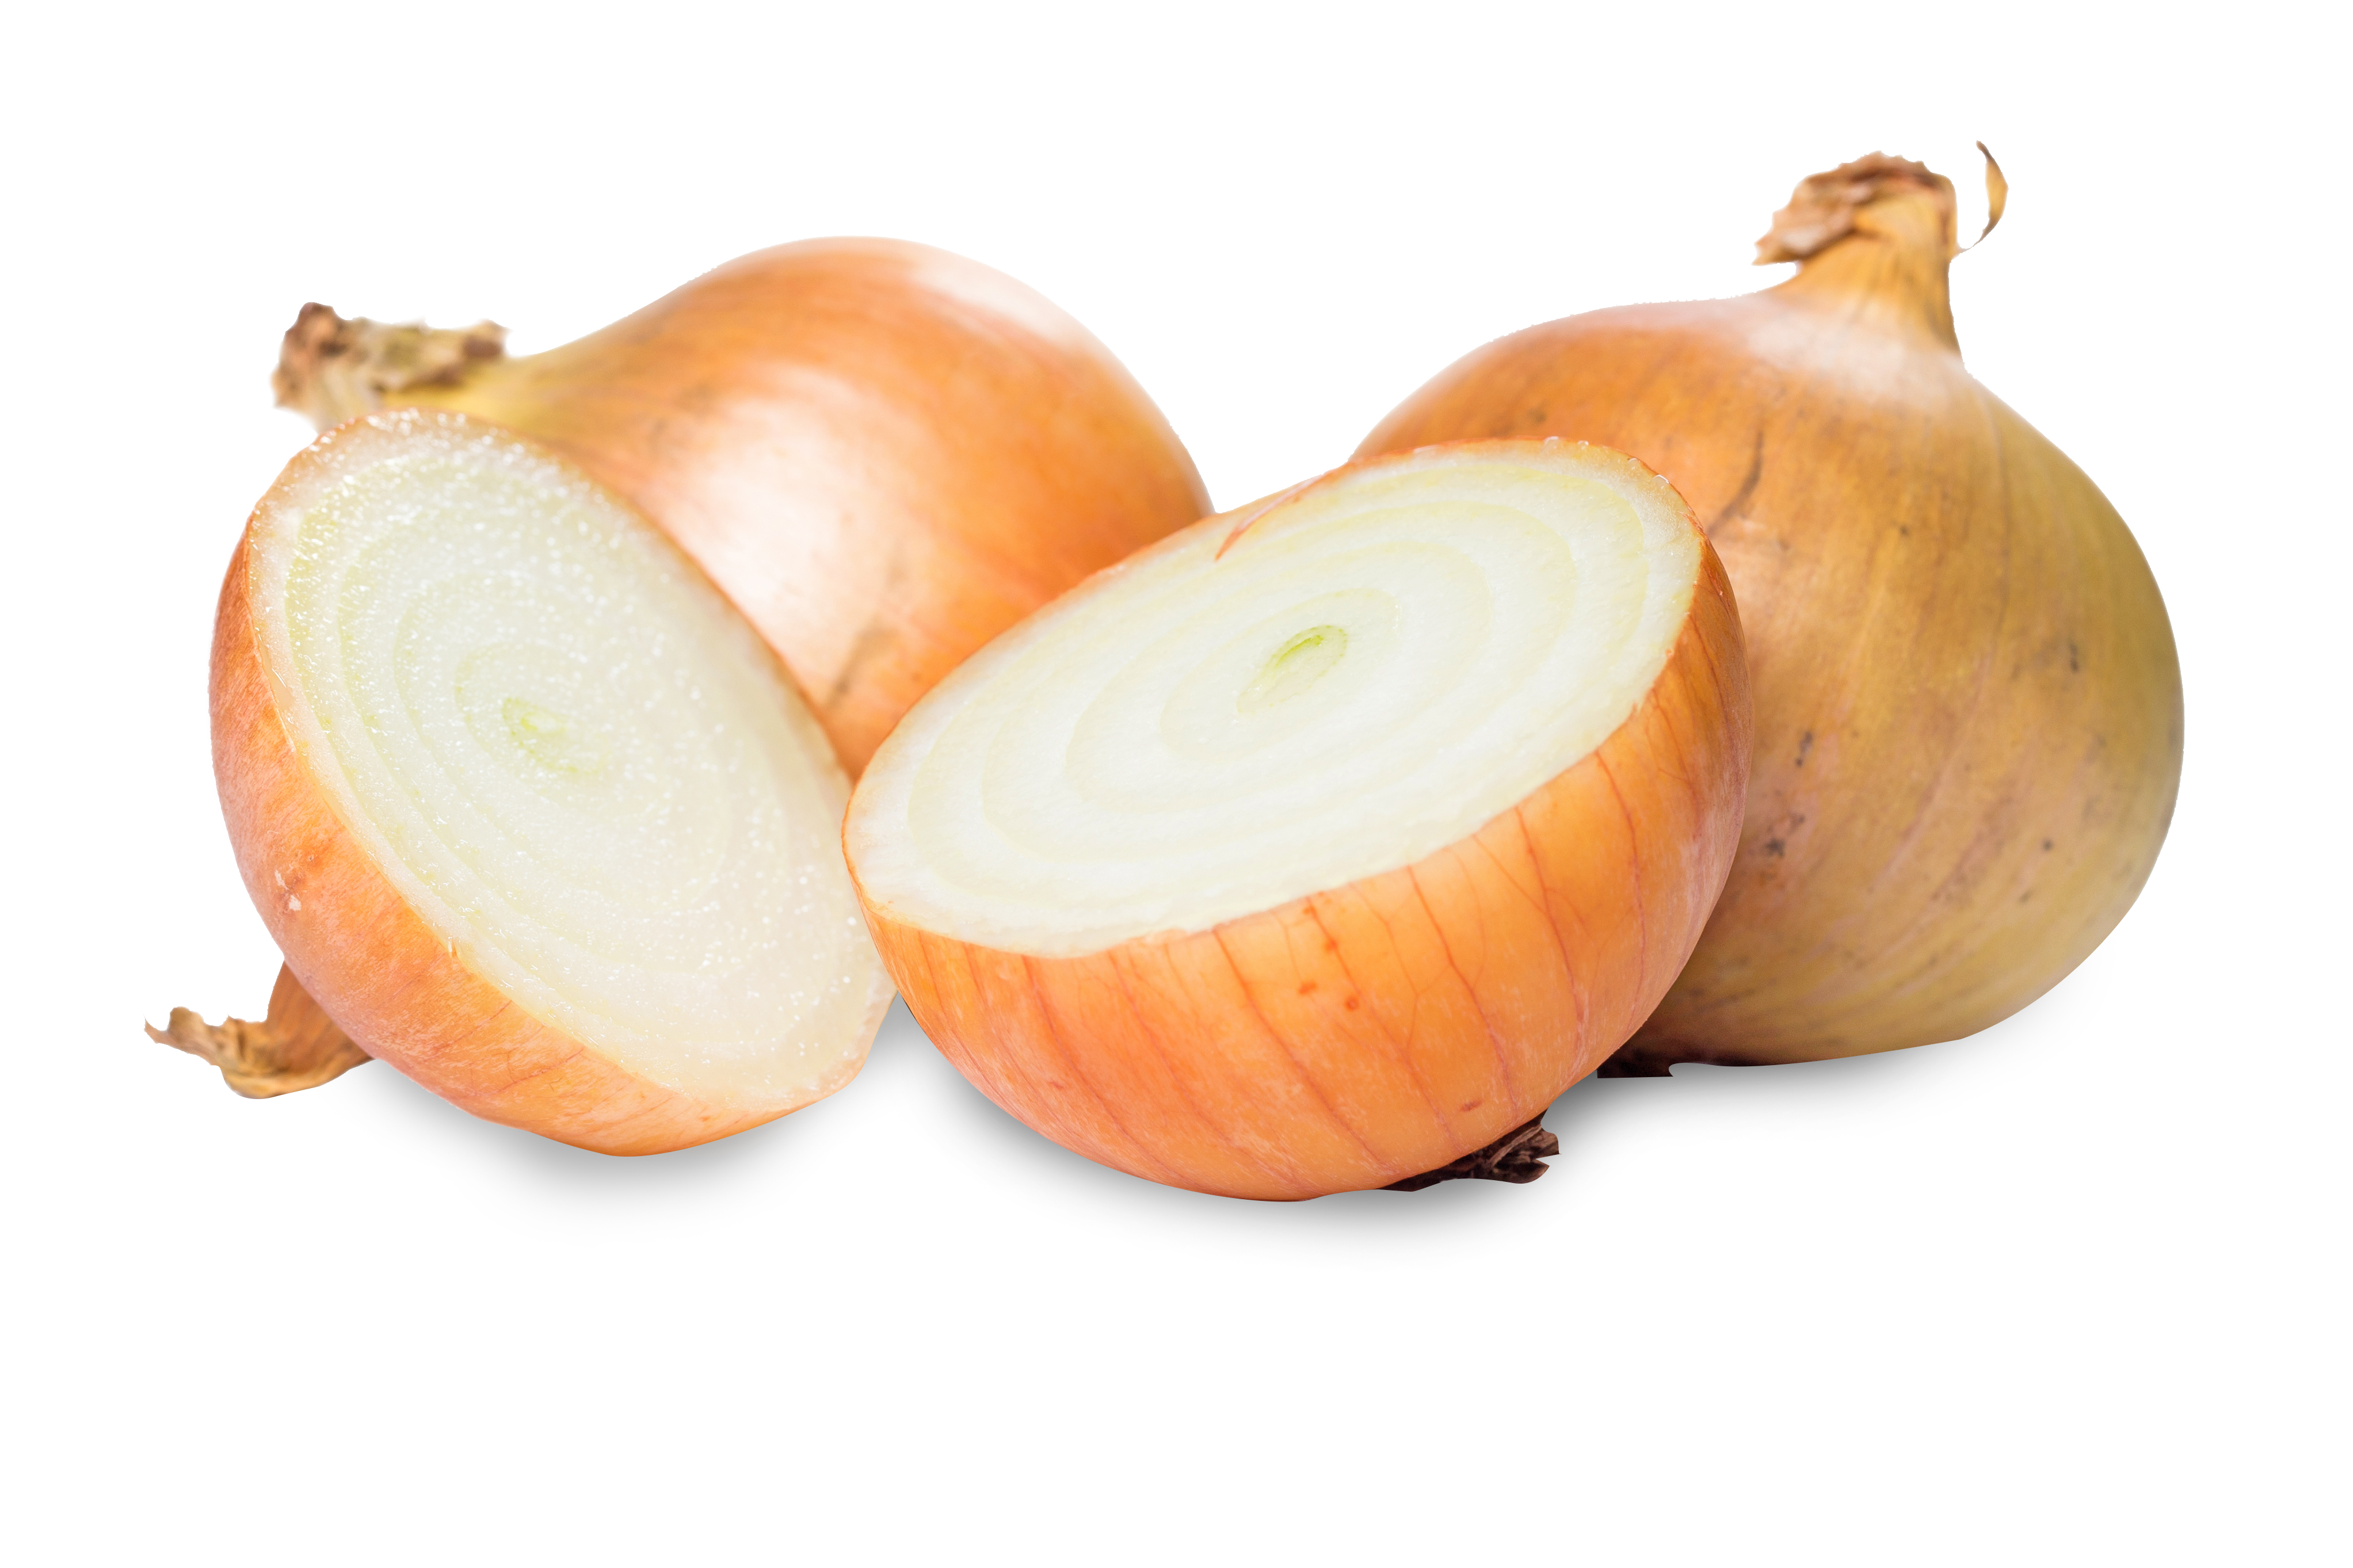 onions, whole and sliced